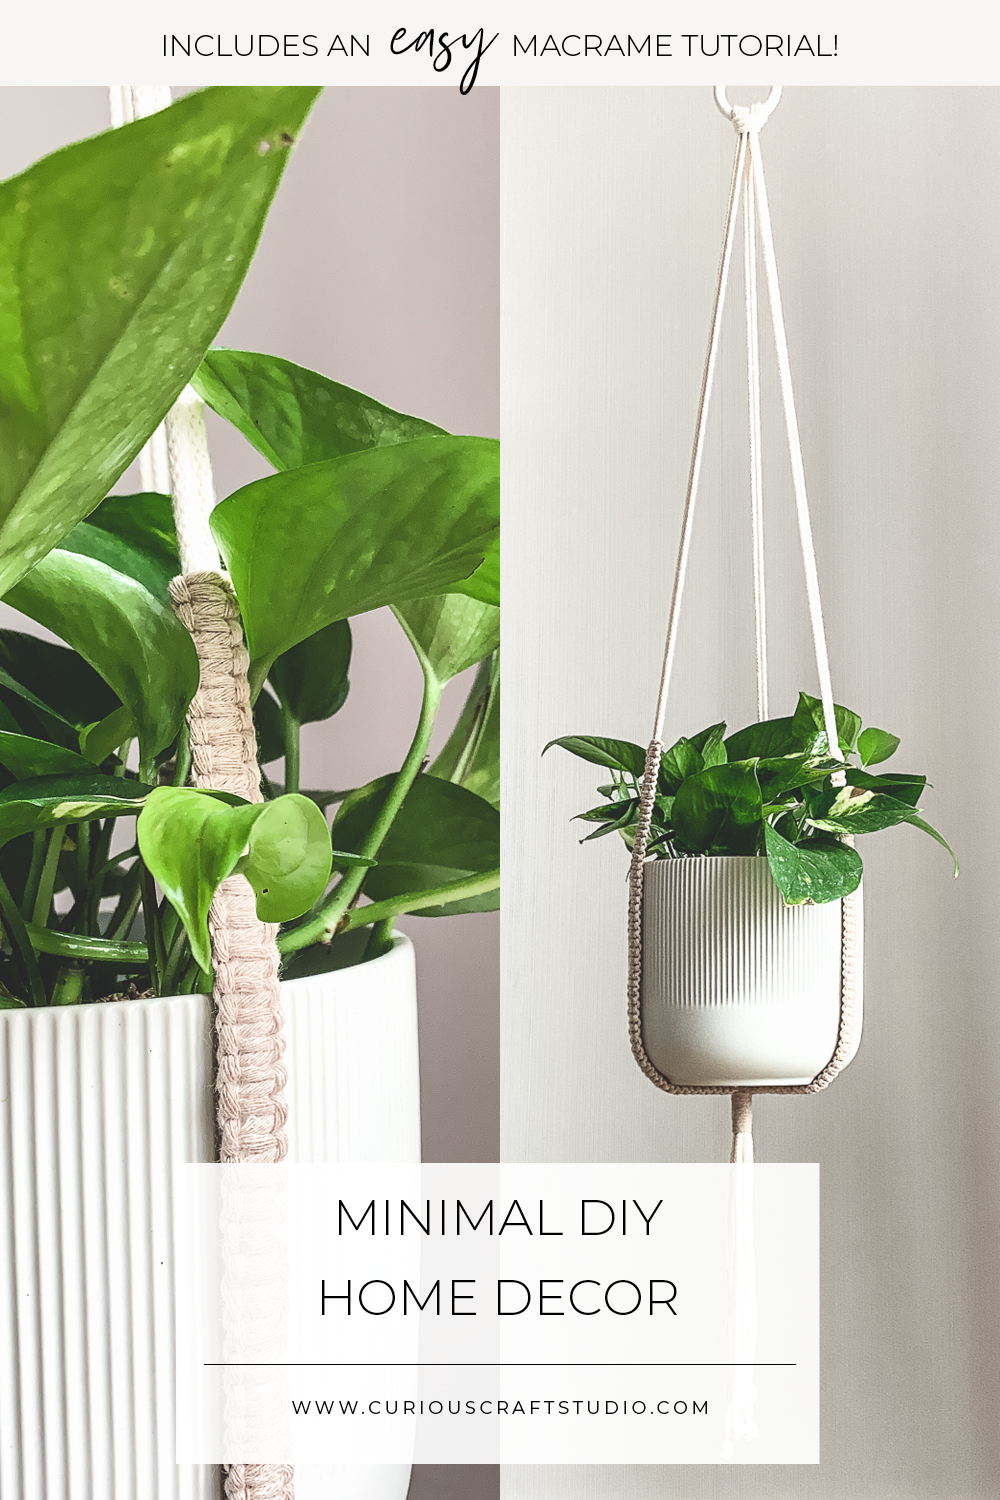 What knot would you use to tie a hanging plant's strings to an S-hook? :  r/knots